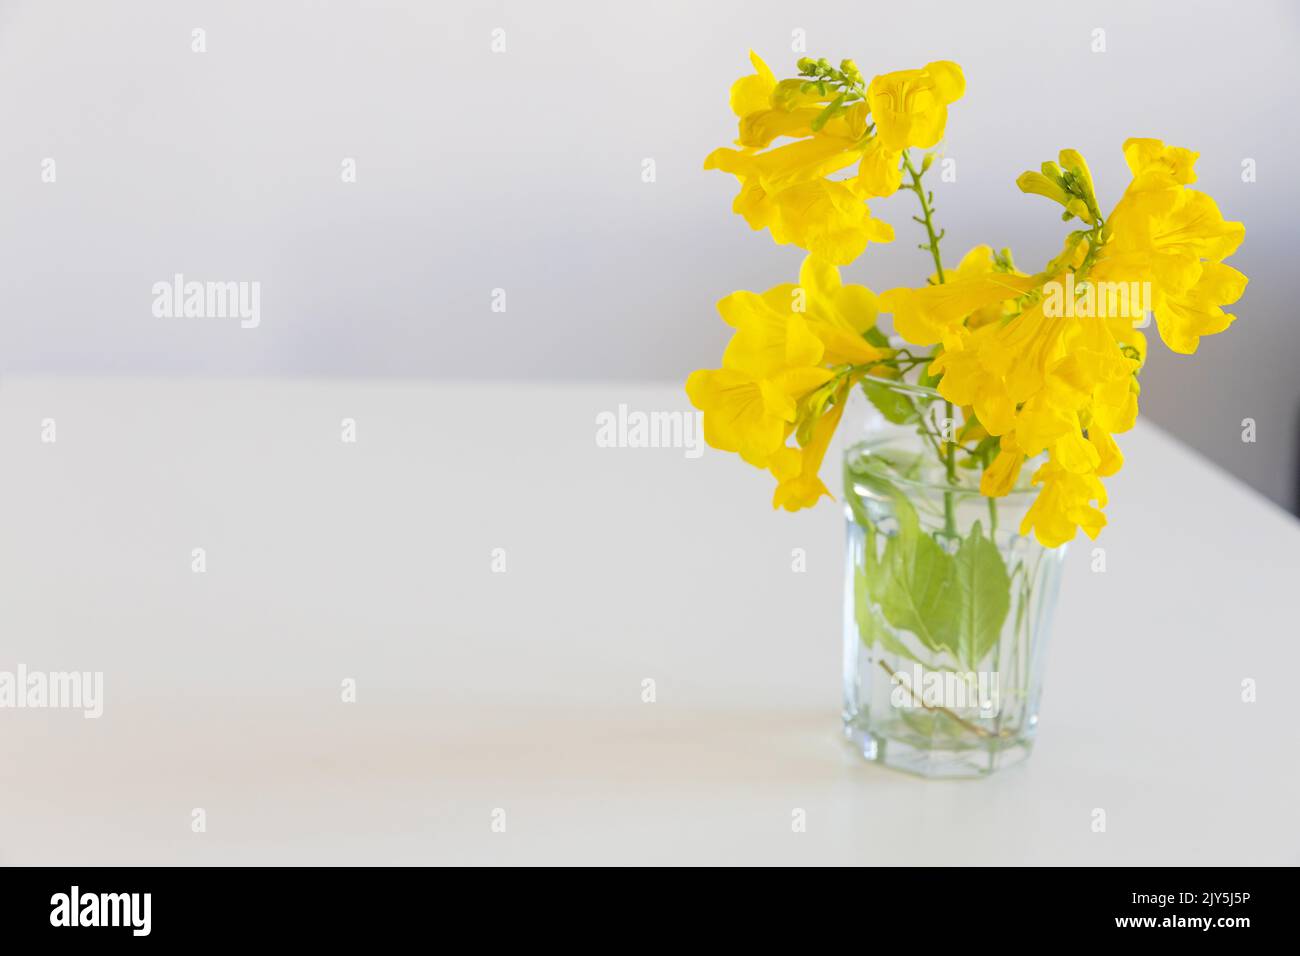 Shrub branch with Tecoma stans flowers in a glass beaker on a white table in the interior. Stock Photo